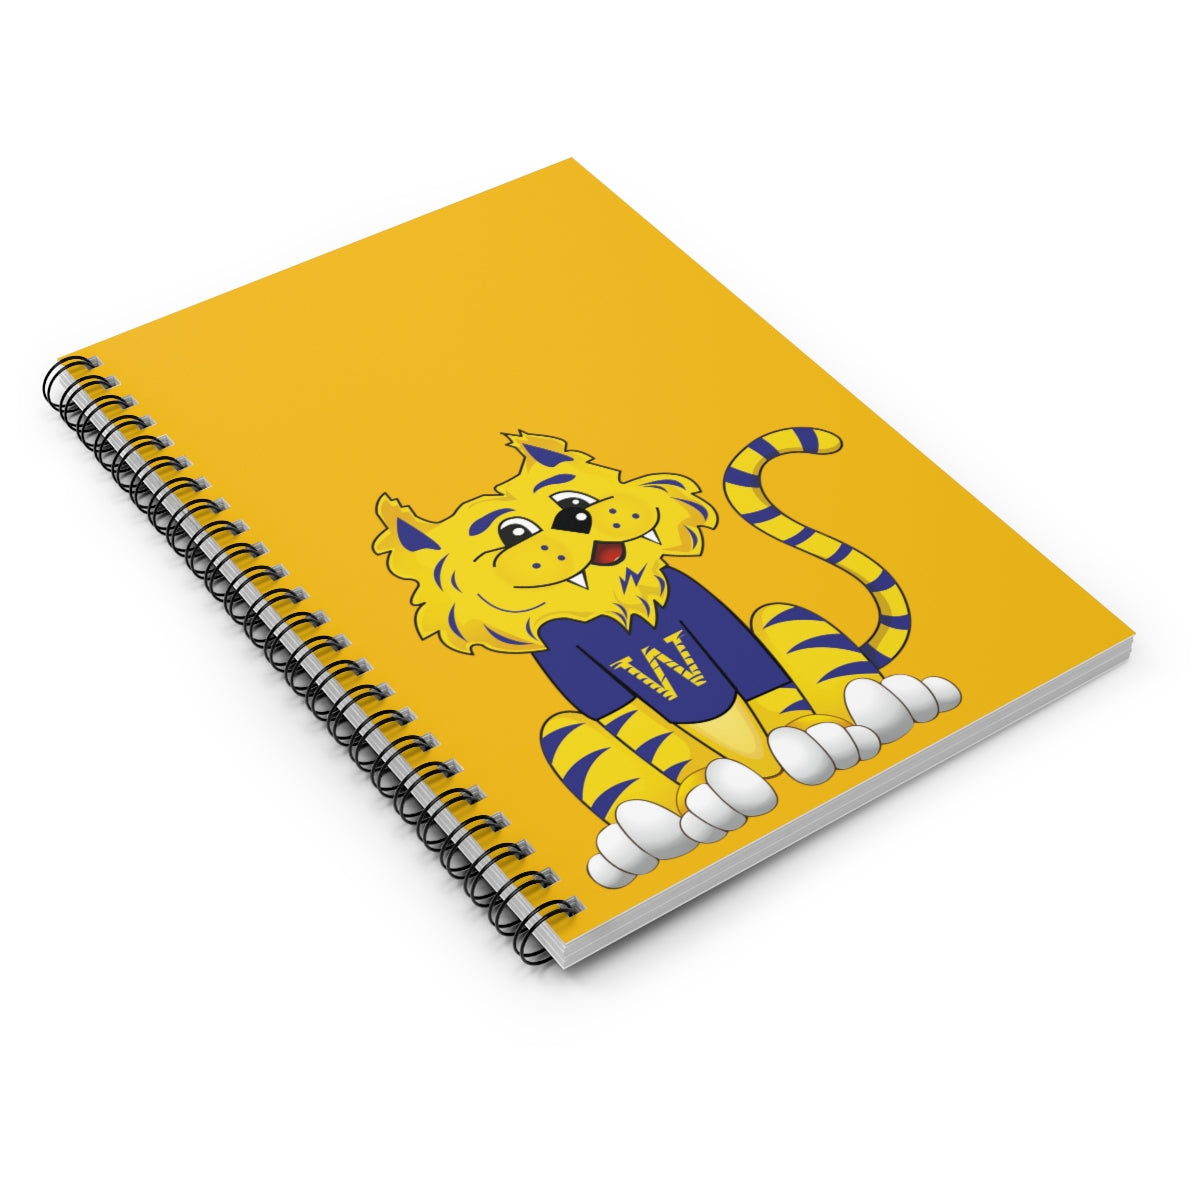 Yellow Spiral Notebook - Ruled Line